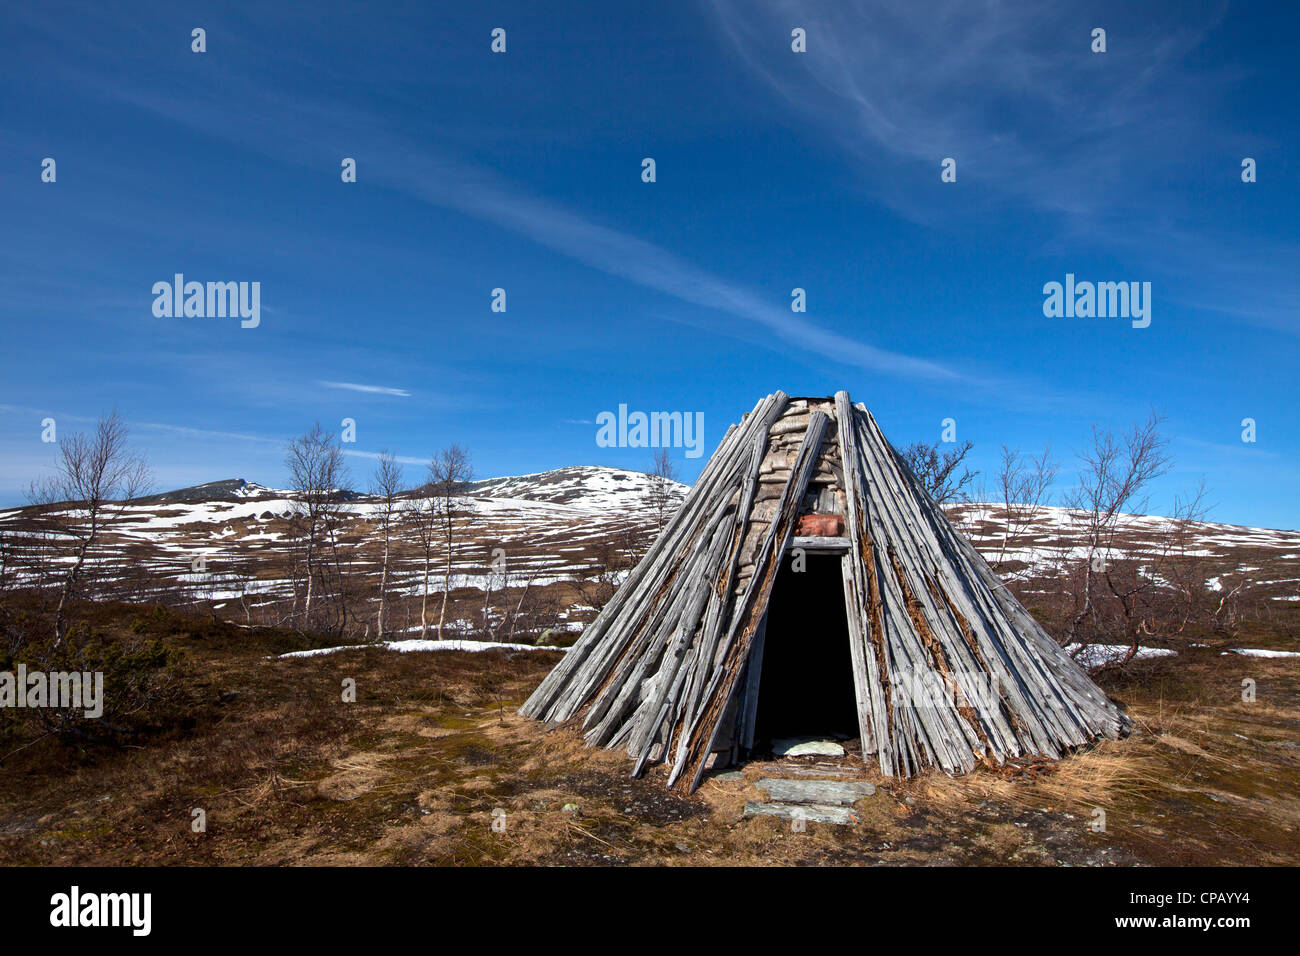 A goahti / kota, traditional Sami wooden hut on the tundra in spring, Lapland, Sweden Stock Photo